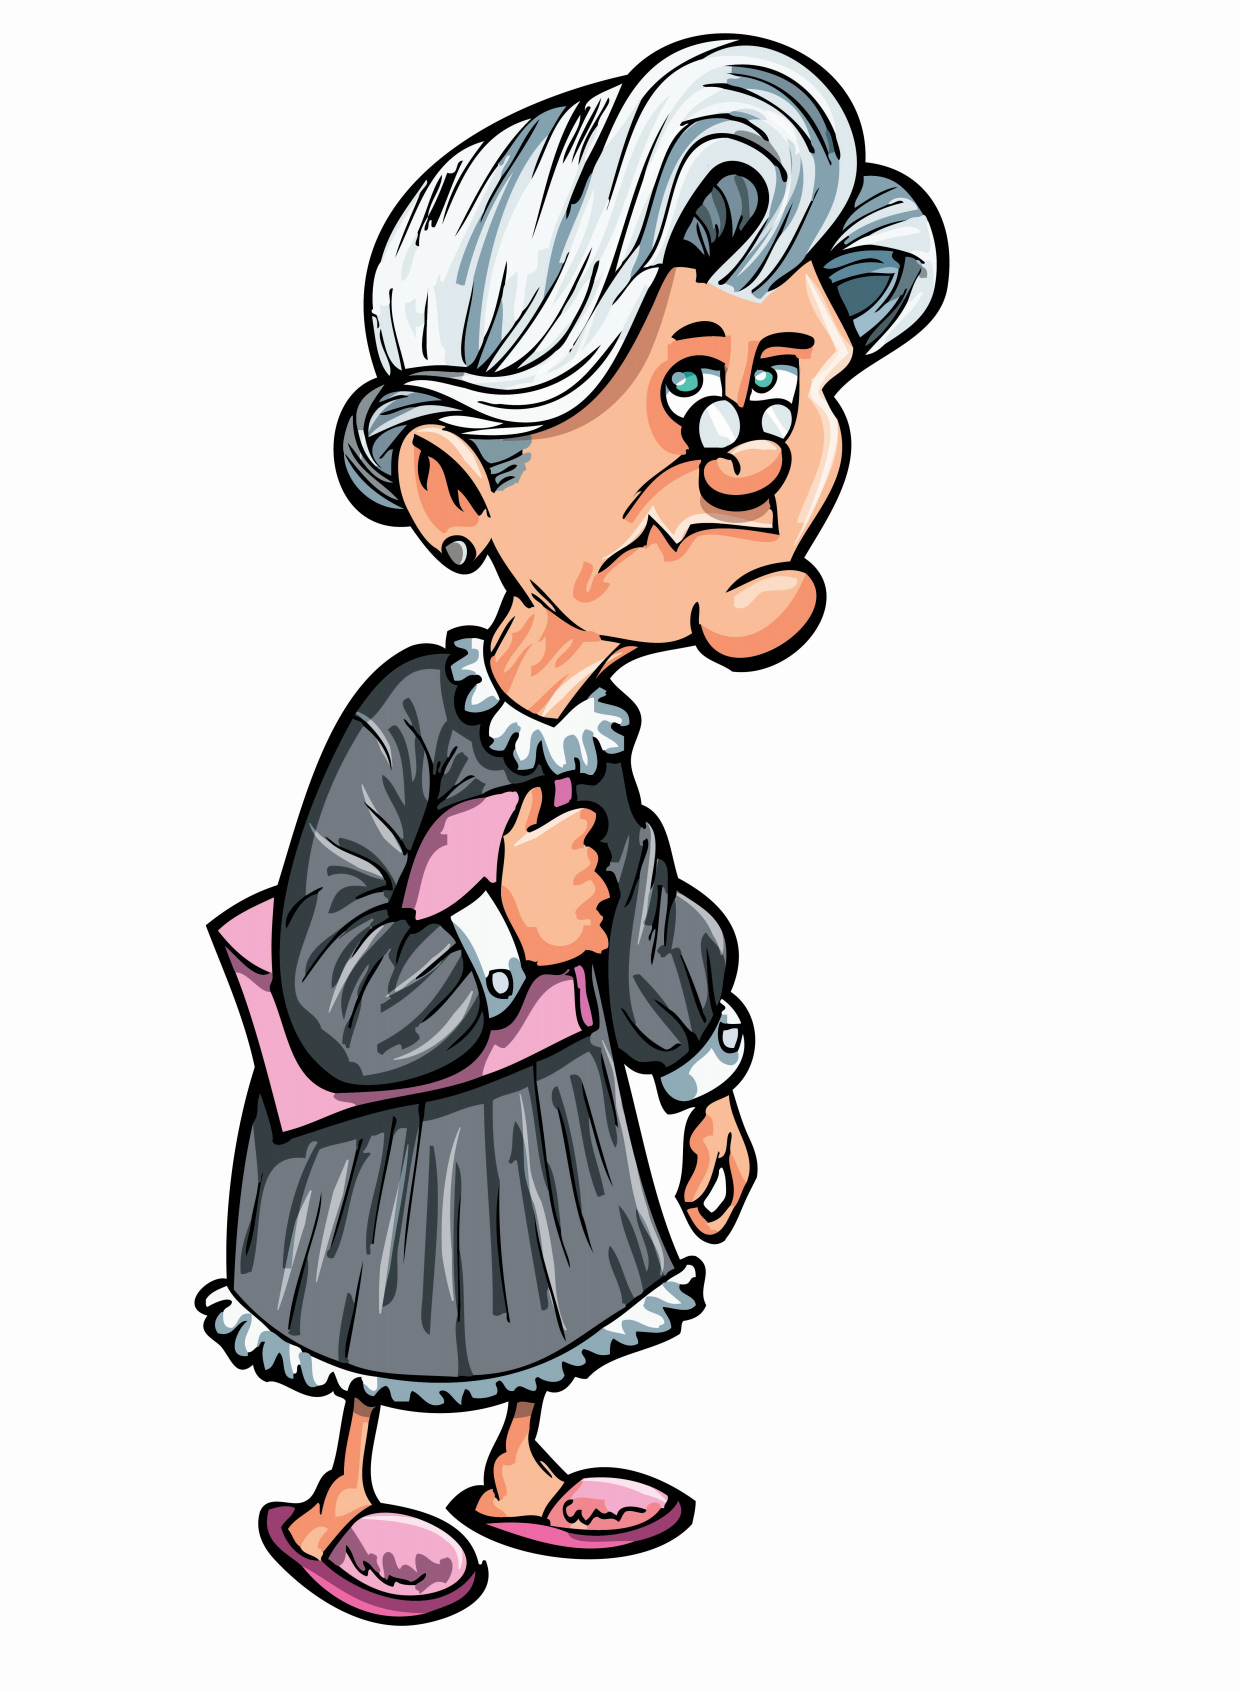 Old Lady Cartoon Pictures - ClipArt Best